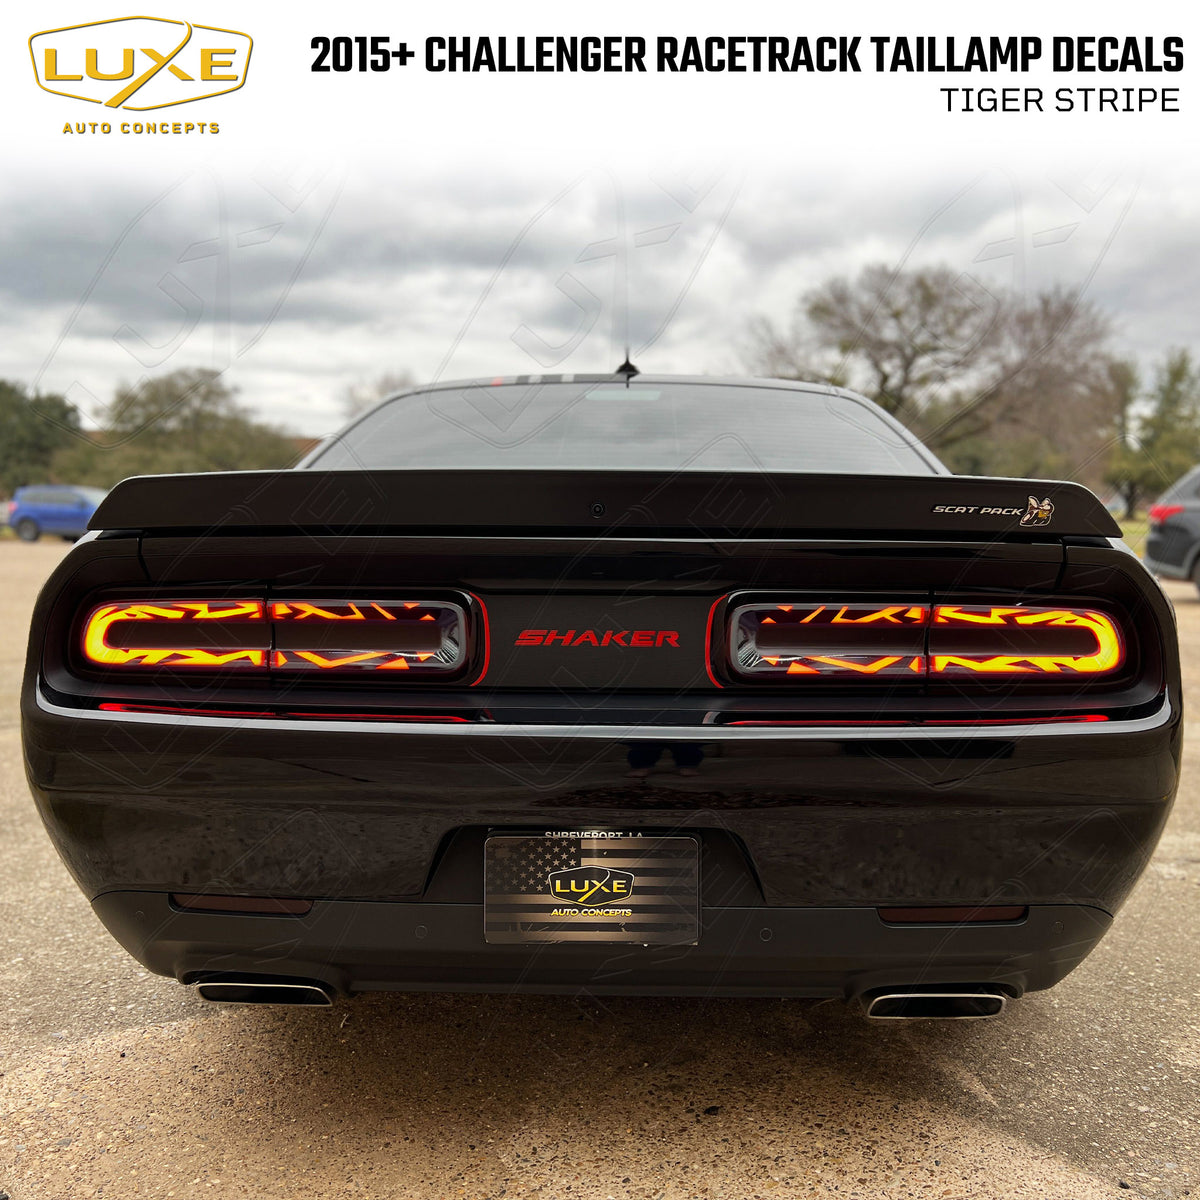 2015+ Challenger Racetrack Taillamp Decals - Tiger Stripe — Luxe